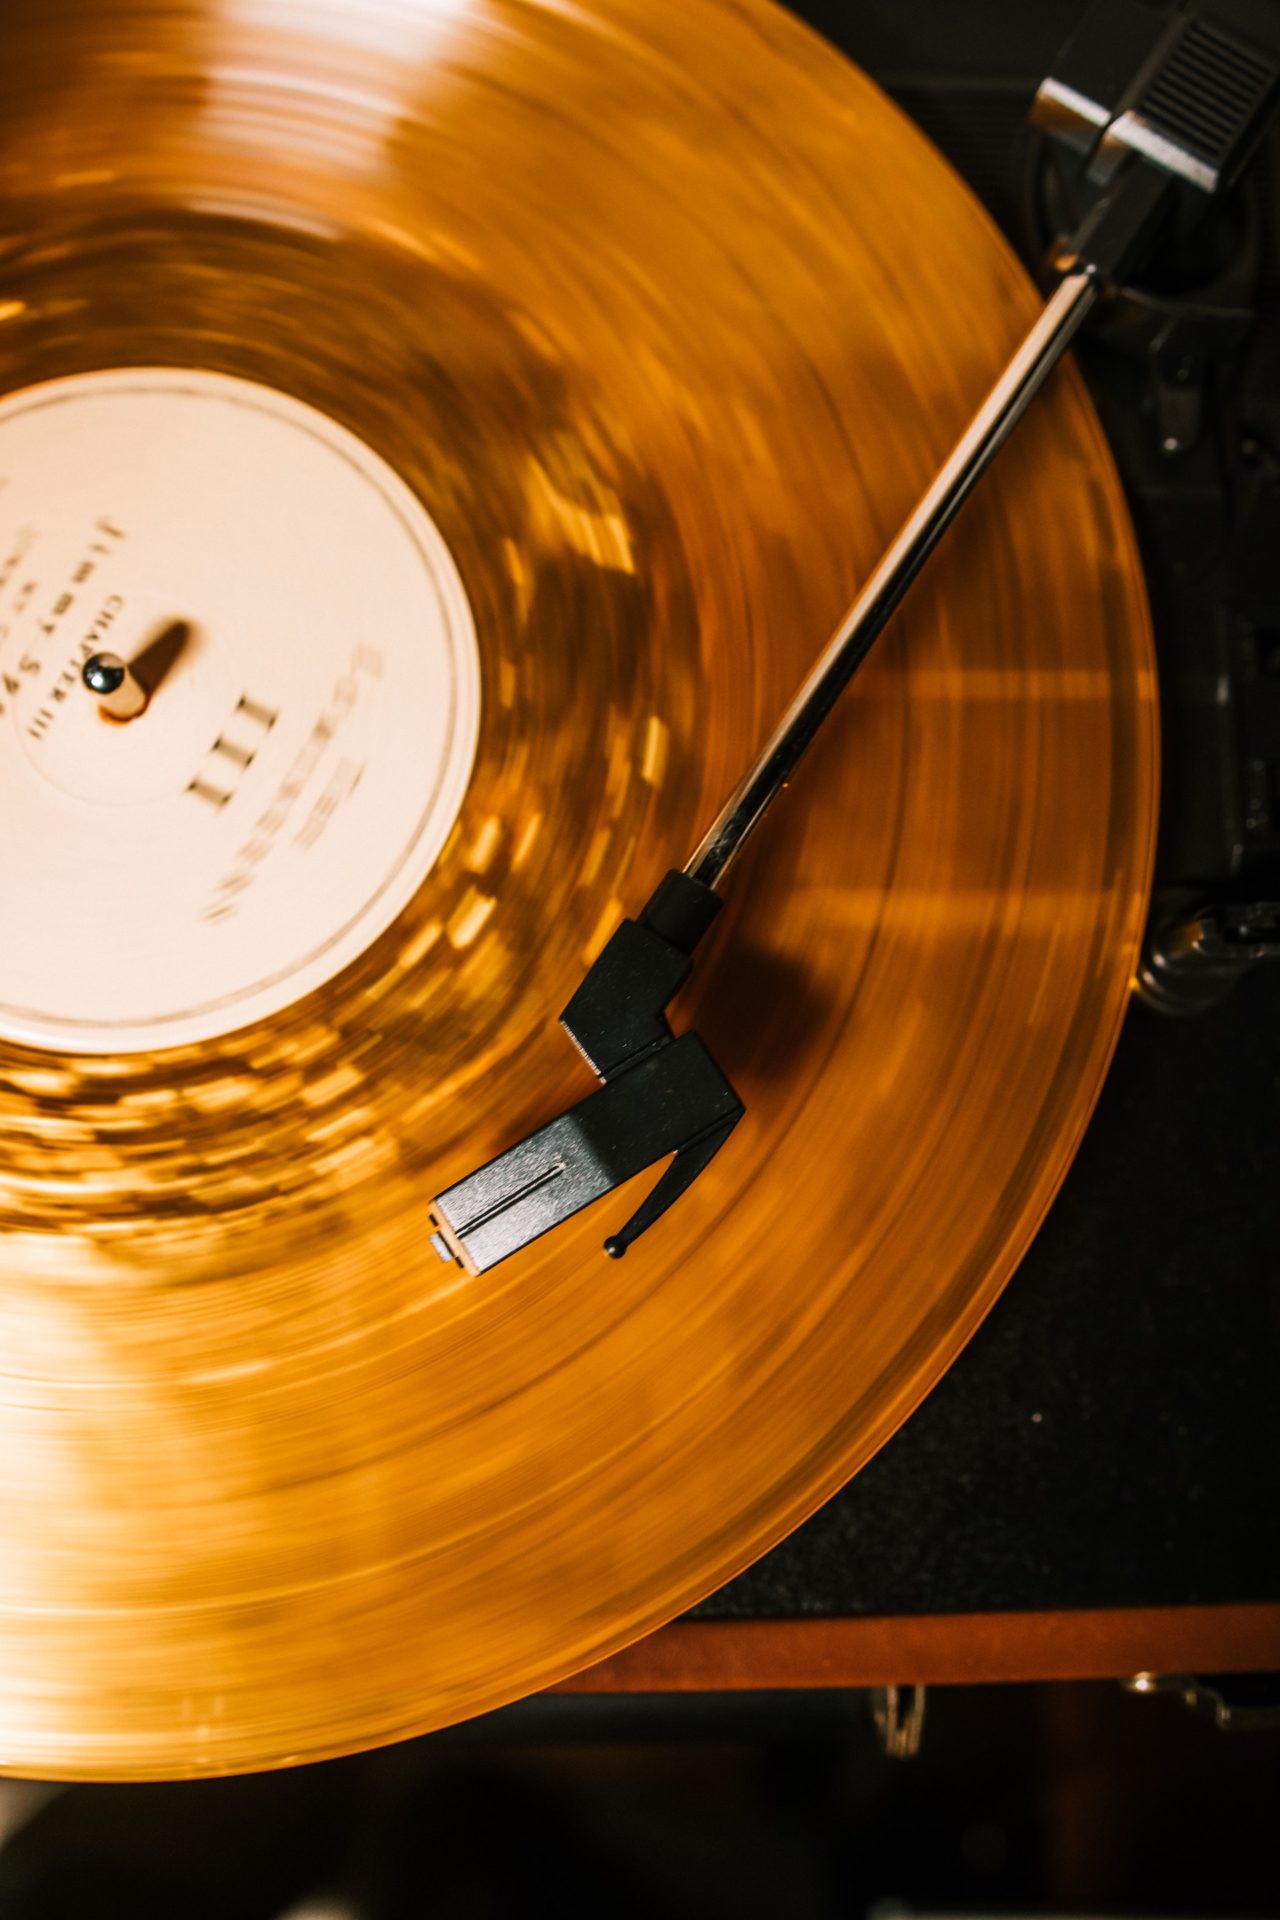 A picture of a yellow record spinning under a black stylus